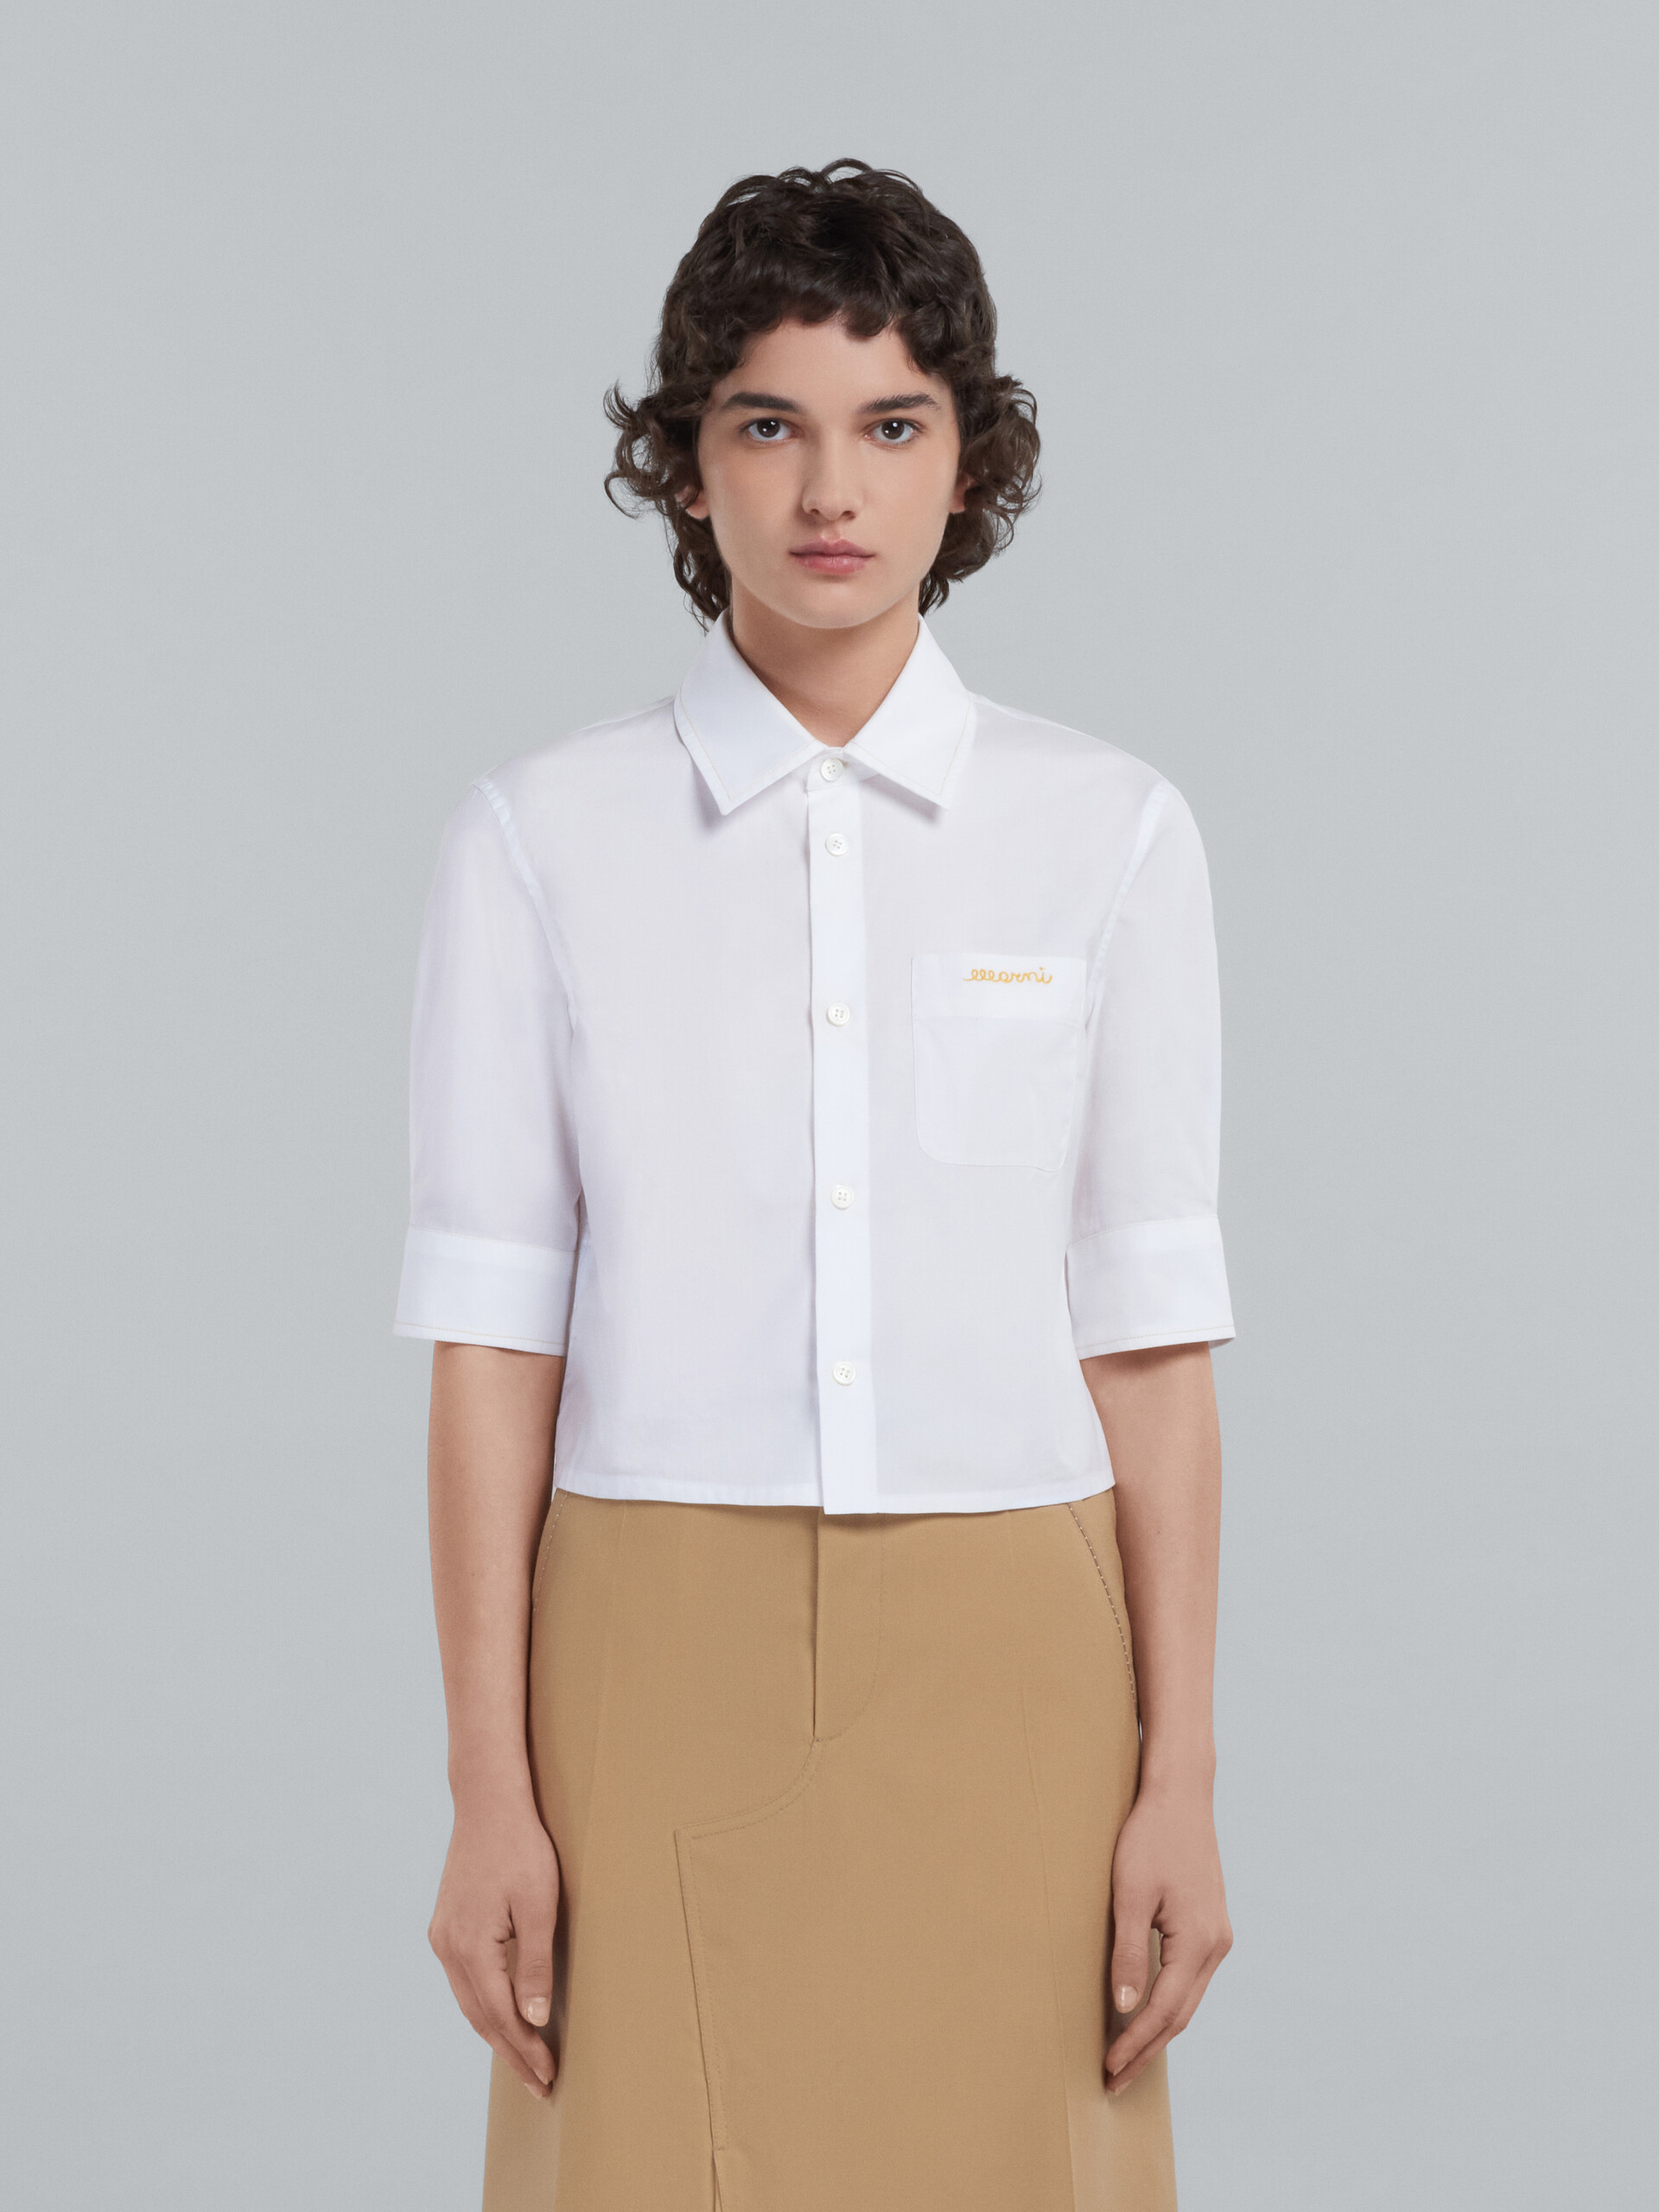 Cropped white poplin shirt with embroidered logo - Shirts - Image 2